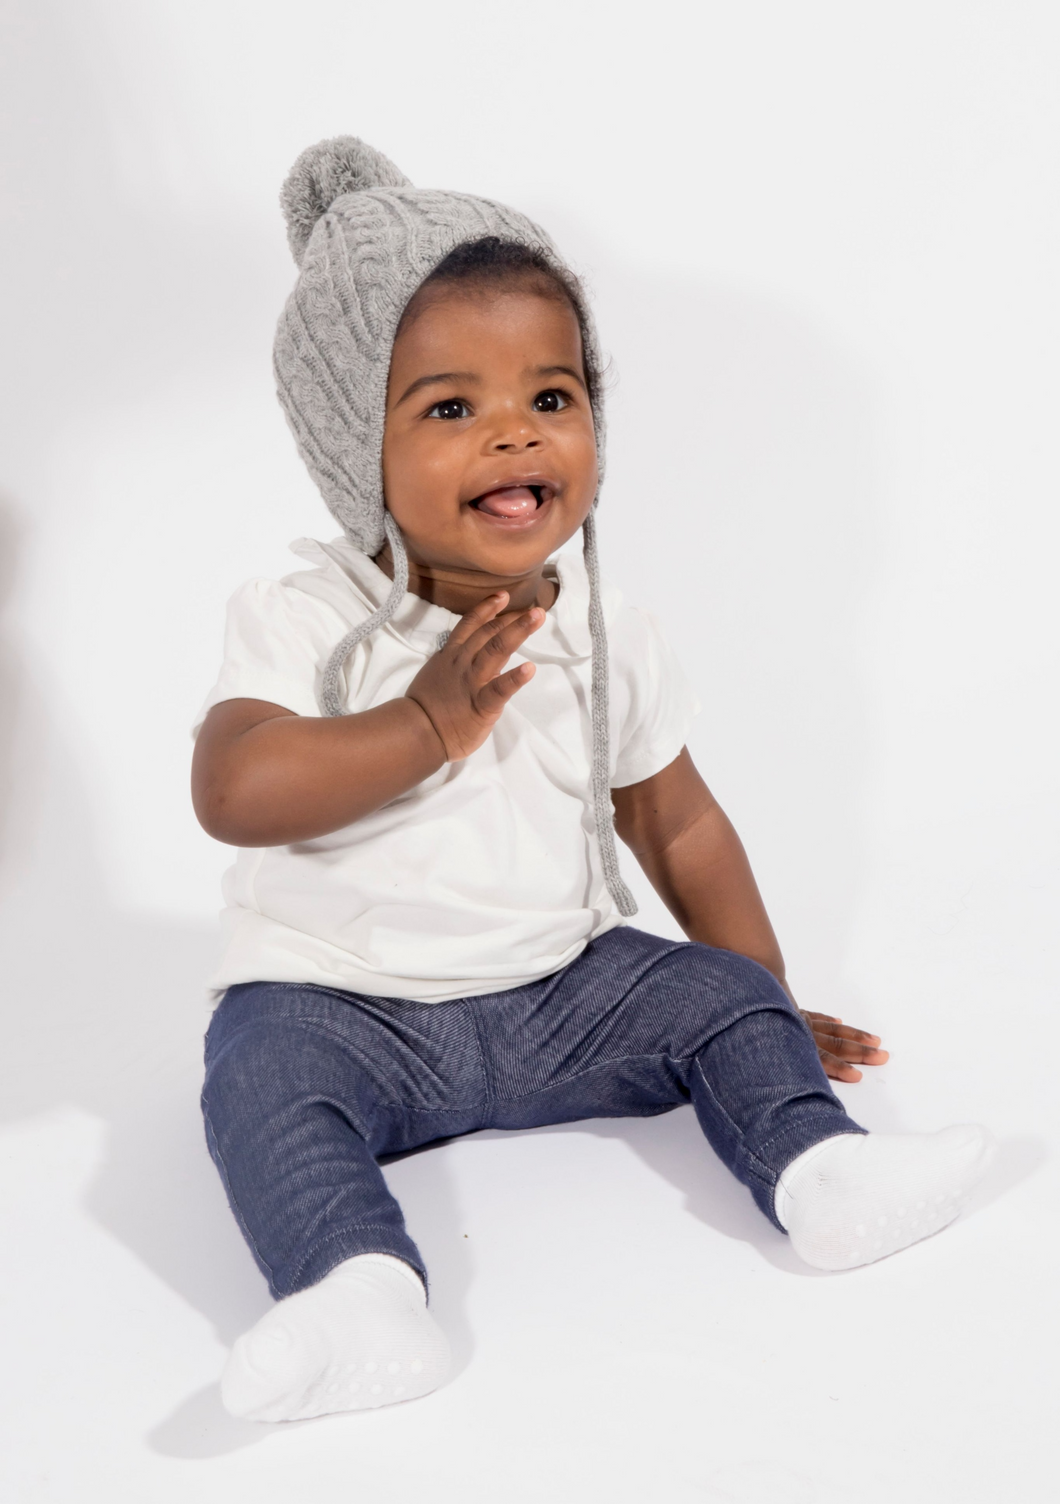 Baby's First Satin Lined Beanie 6 Months - 2 Years - Black Sunrise UK Satin Lined Hats,. Satin lined Beanie, Hoodies. For children, adults, babies. For those with curly natural hair, sensitive scalps and fragile curls.